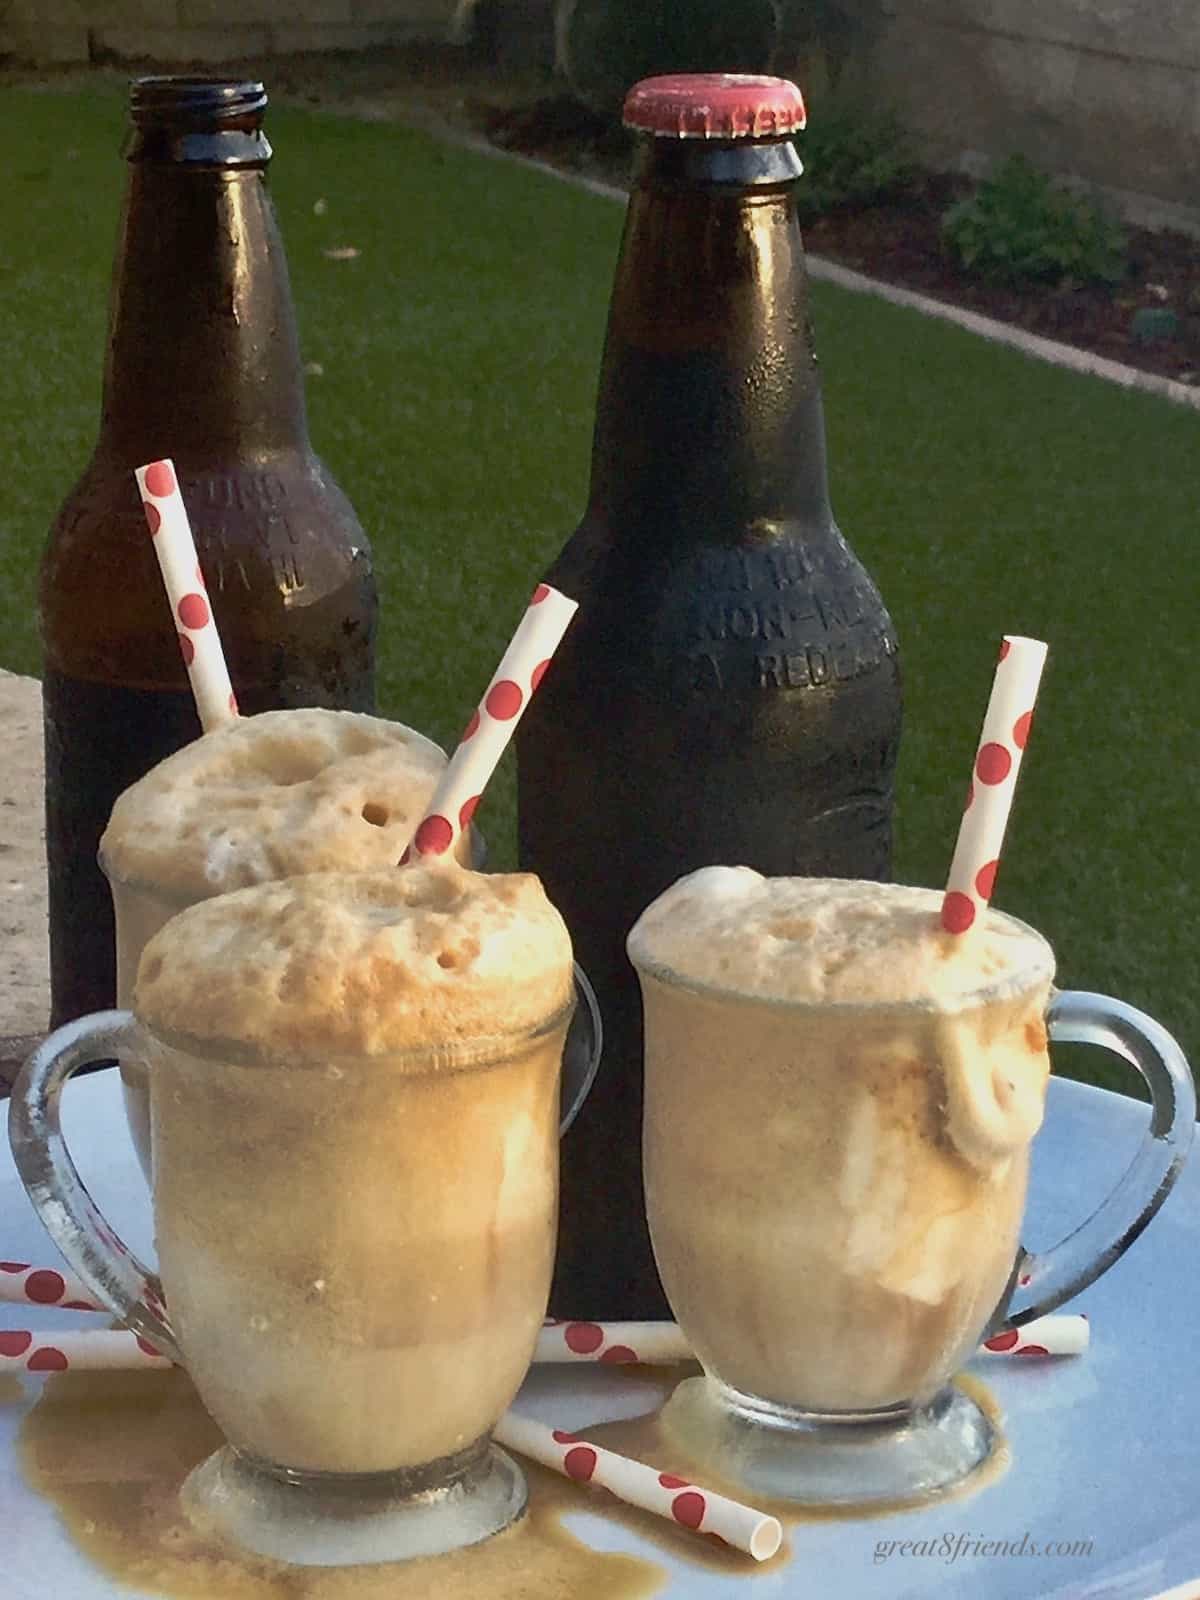 Three glass mugs filled with root beer floats with straws and 2 brown bottles in the background.